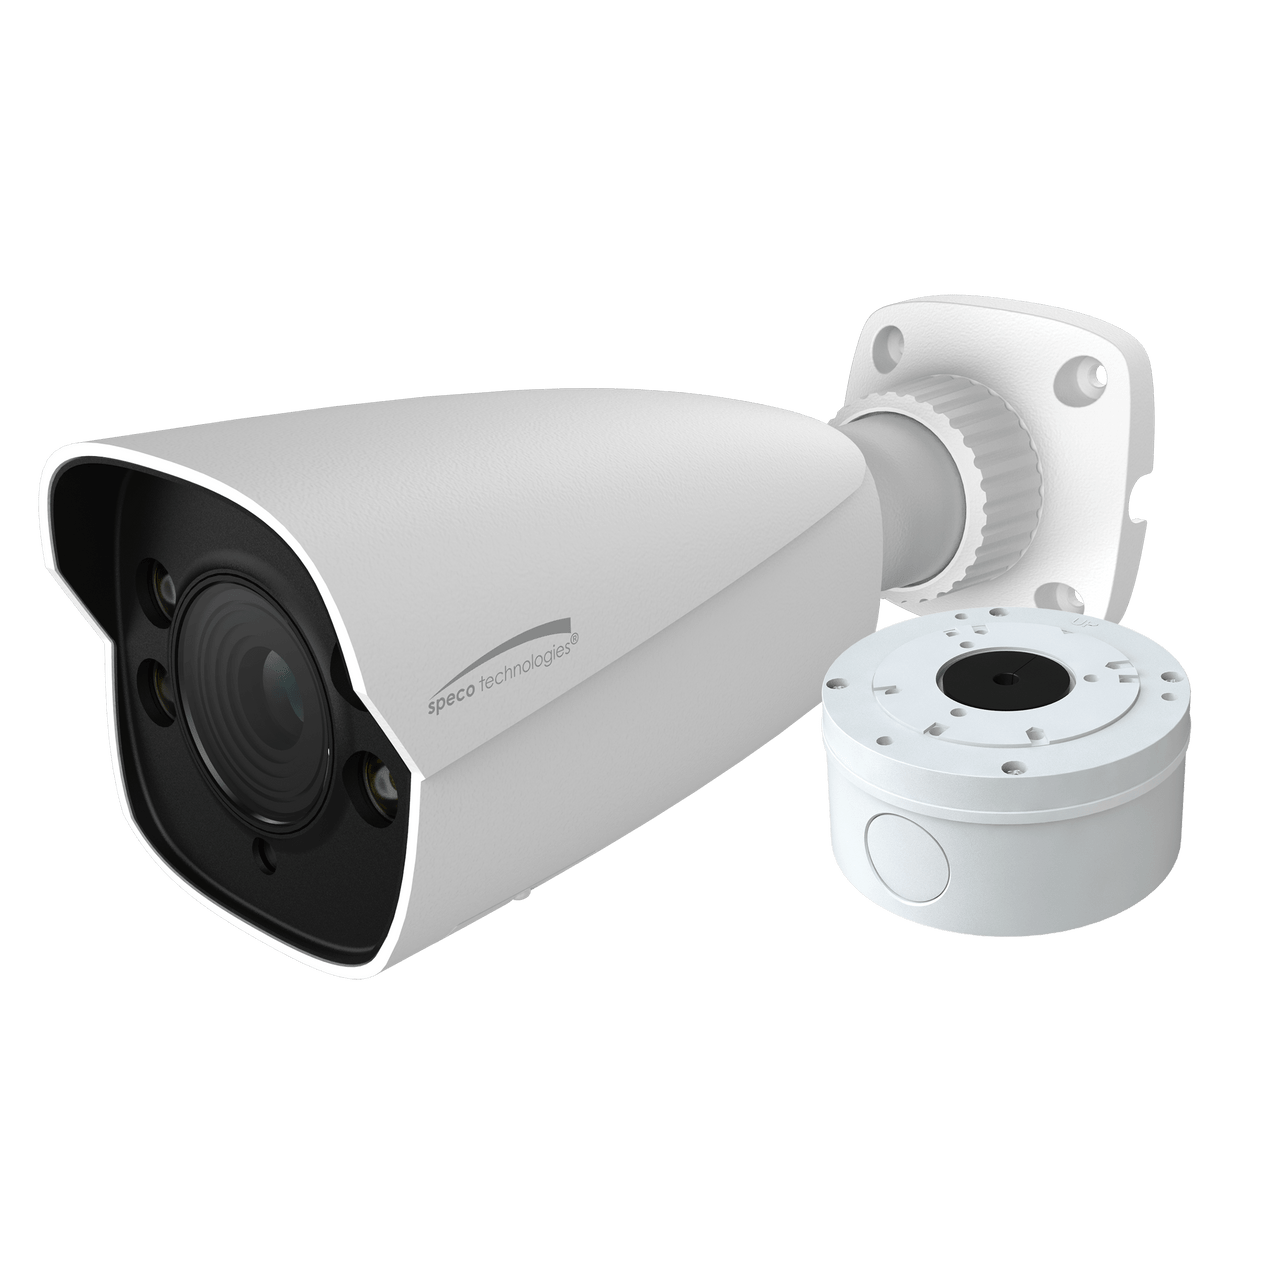 Speco Technologies O4VB1M 4MP H.265 IP Bullet Camera with IR, 2.8-12mm motorized Lens, Included Junction Box, White (O4VB1M)